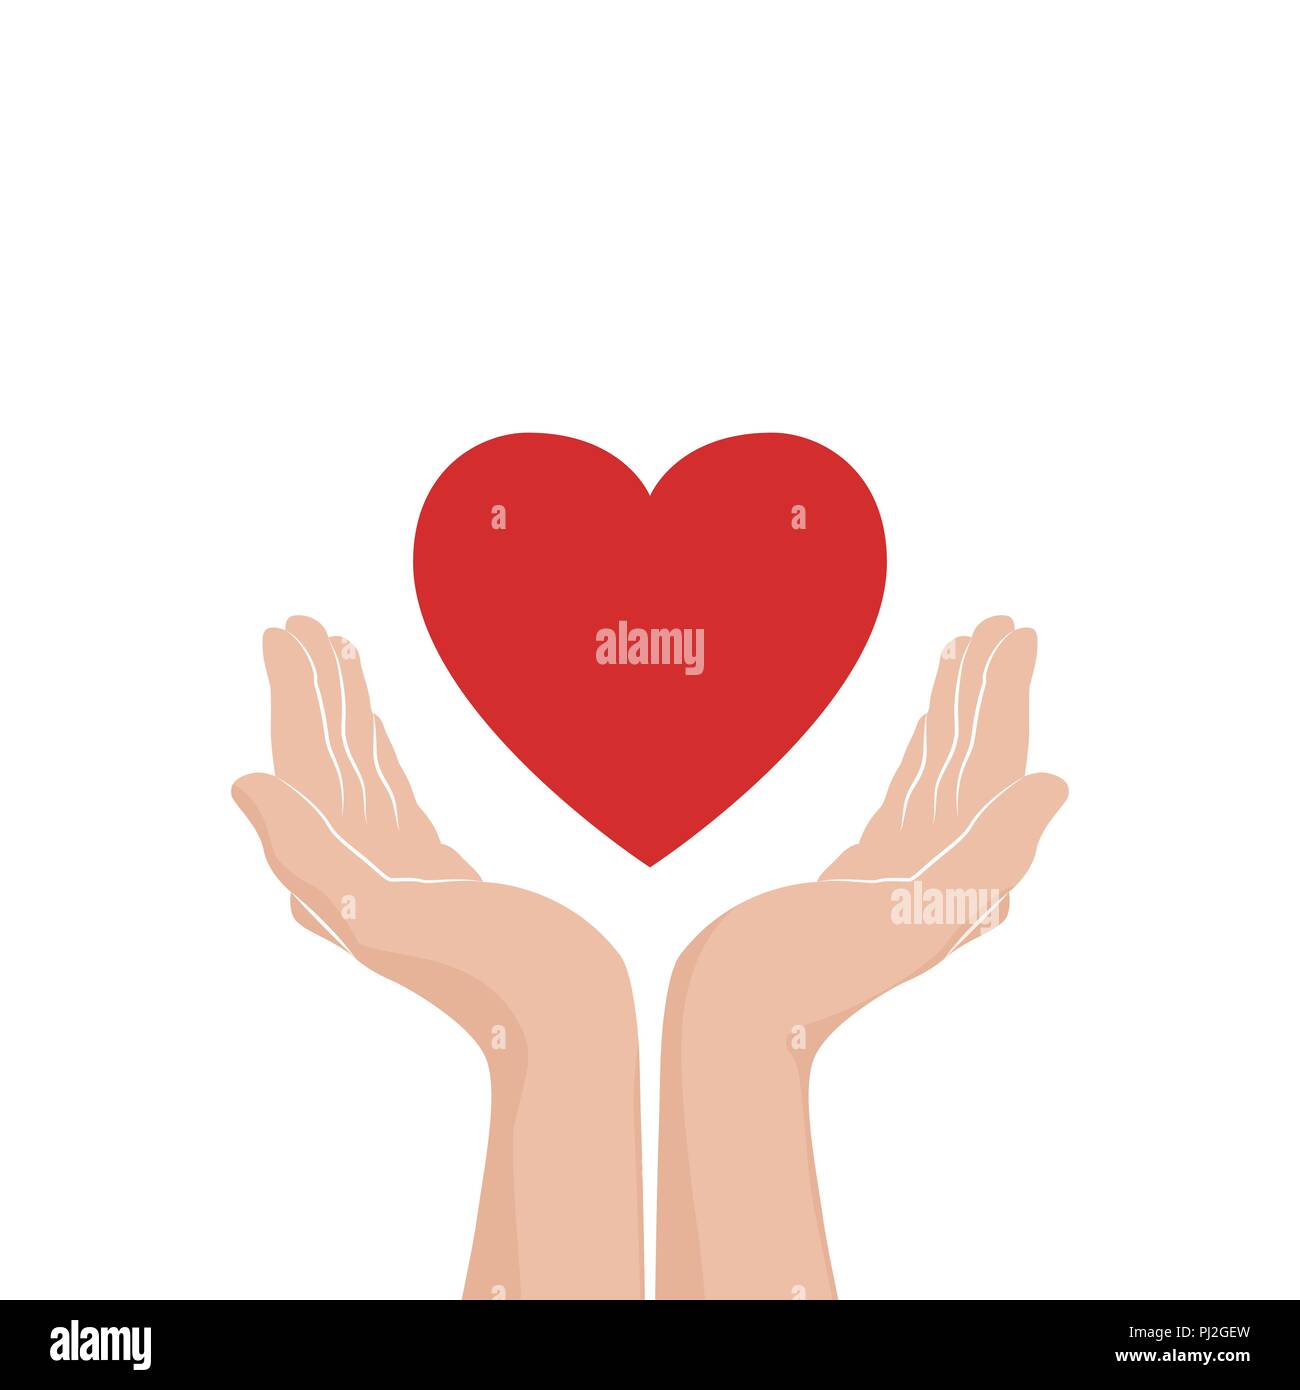 Hands protect person Stock Vector Images - Alamy